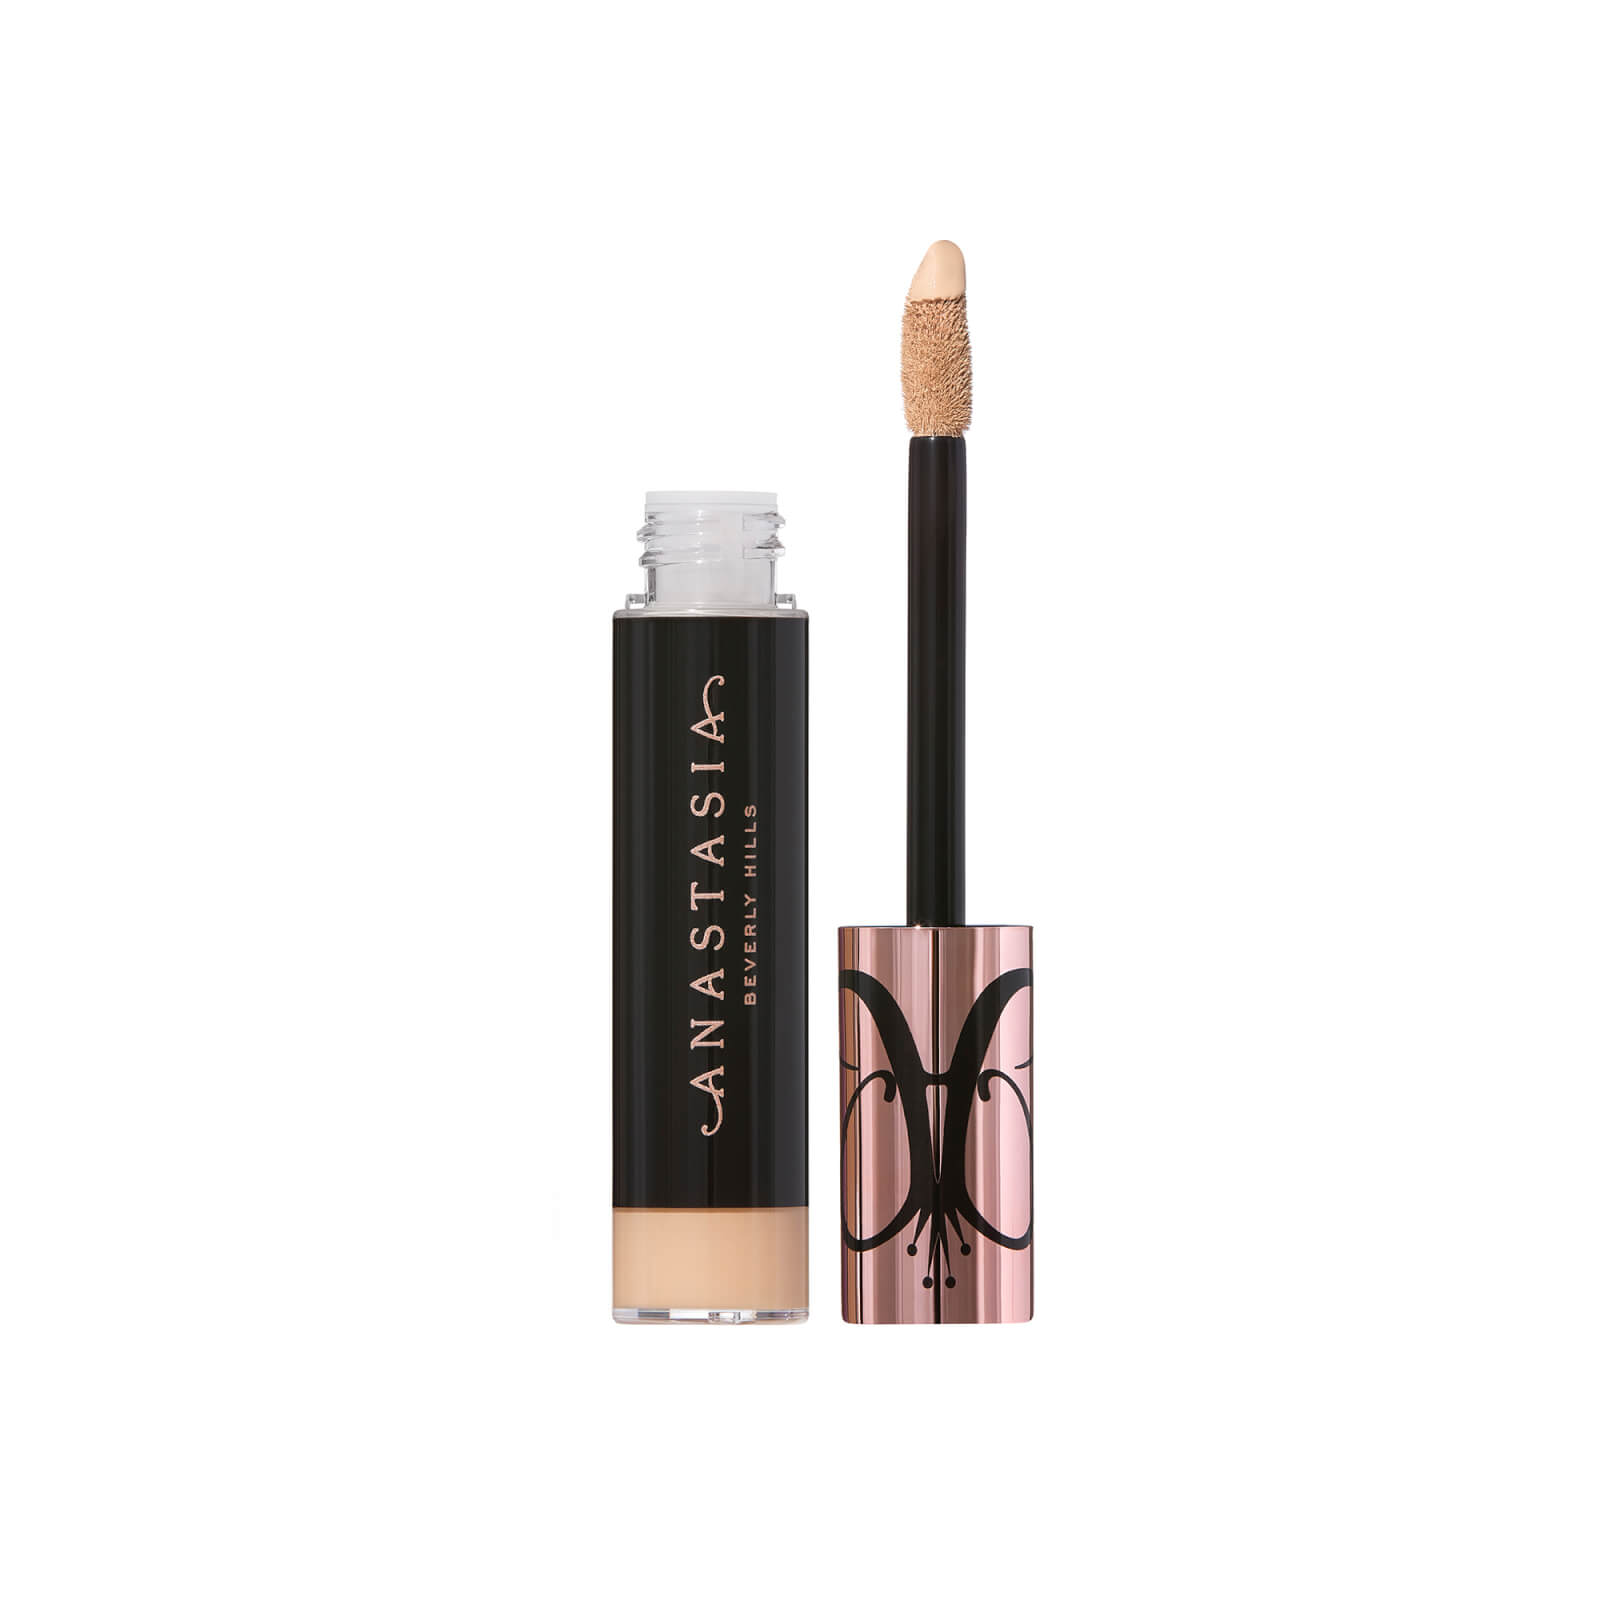 Anastasia Beverly Hills Magic Touch Concealer 12ml (Various Shades) - 11